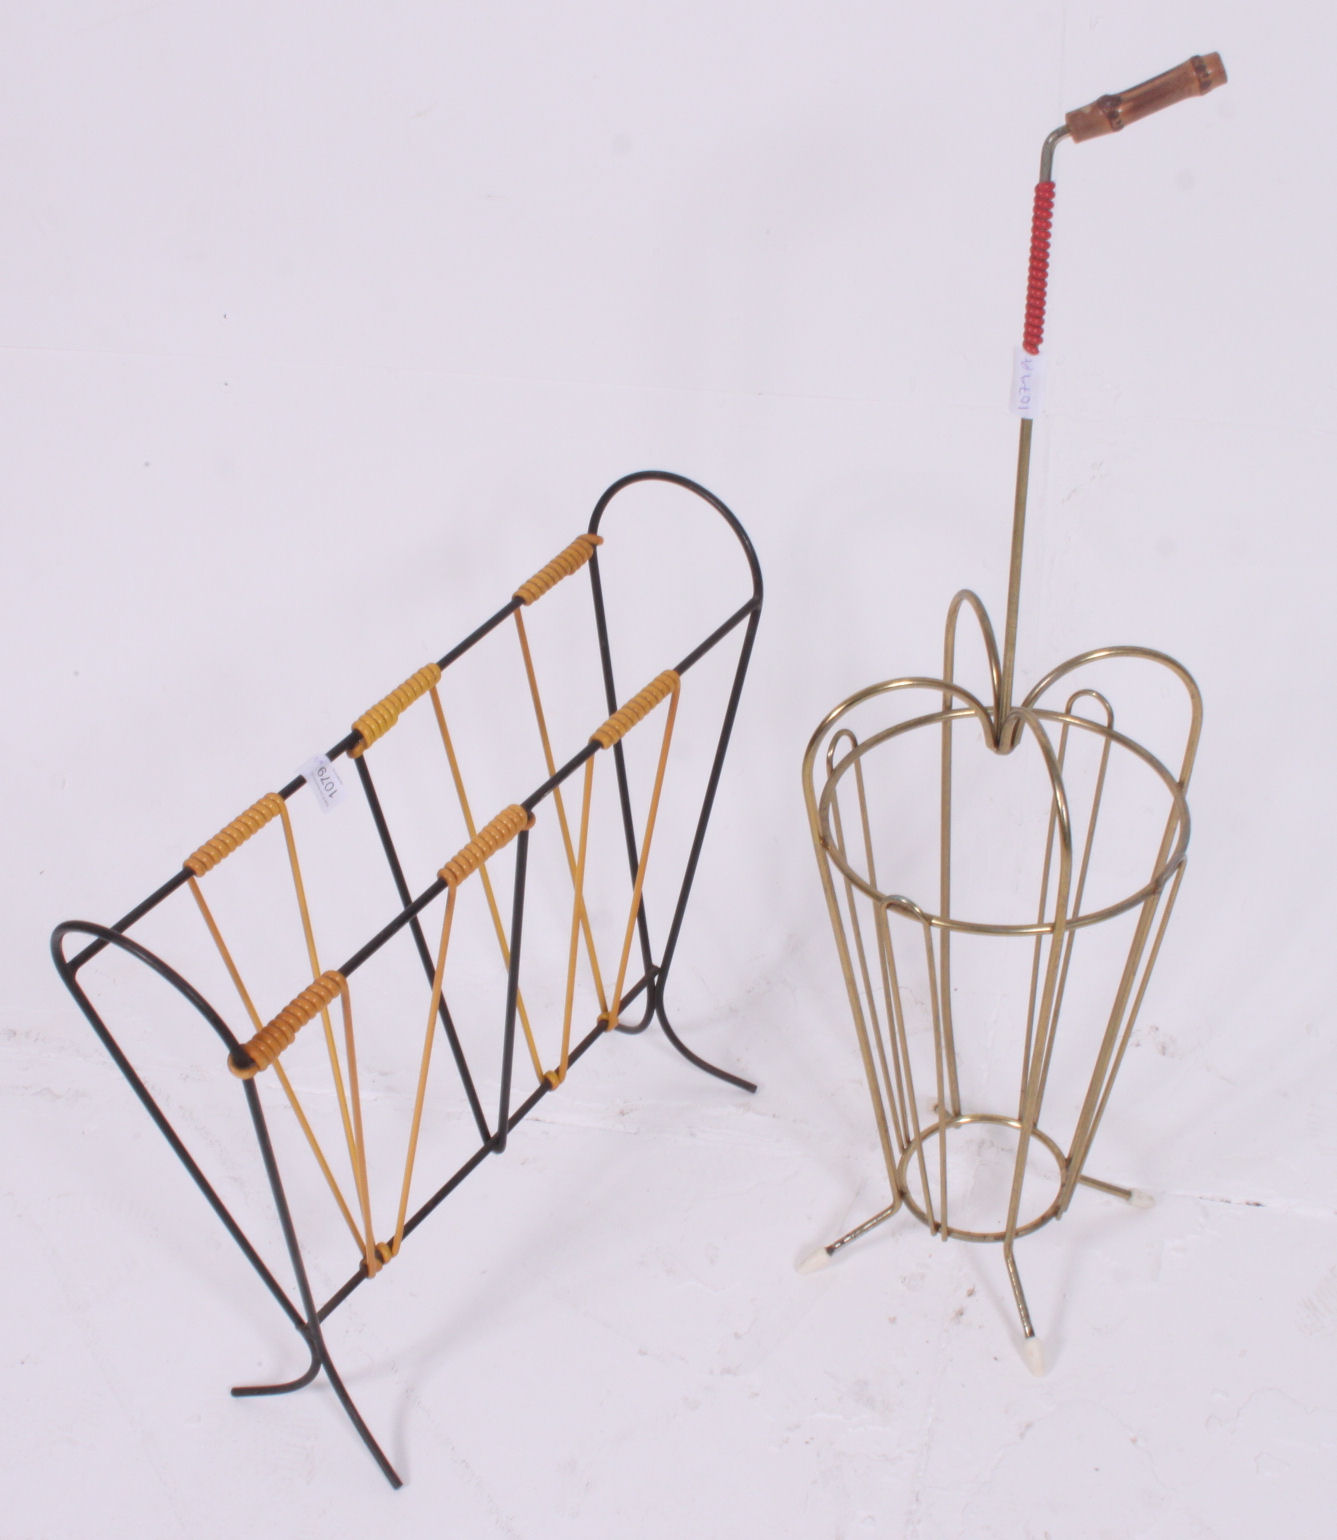 A retro 1950's wire work two tone black and yellow magazine rack together with a metal wire work - Image 2 of 2